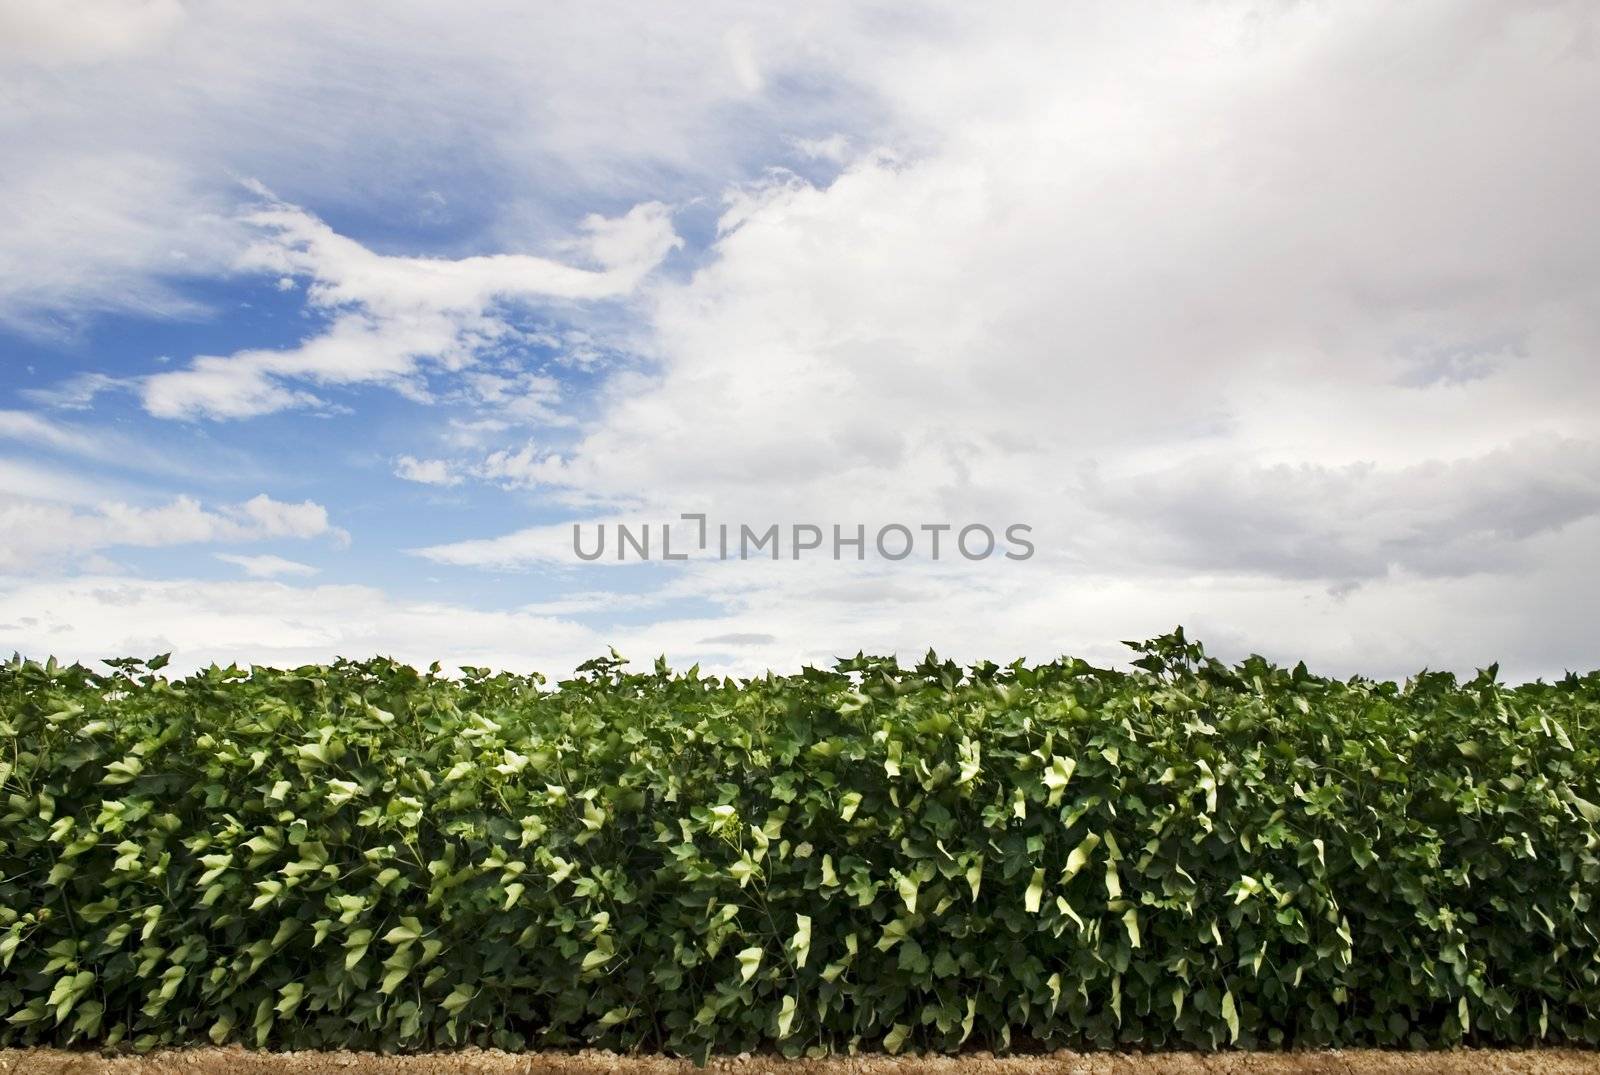 Green leafy crop with a cloudy blue sky in the background.